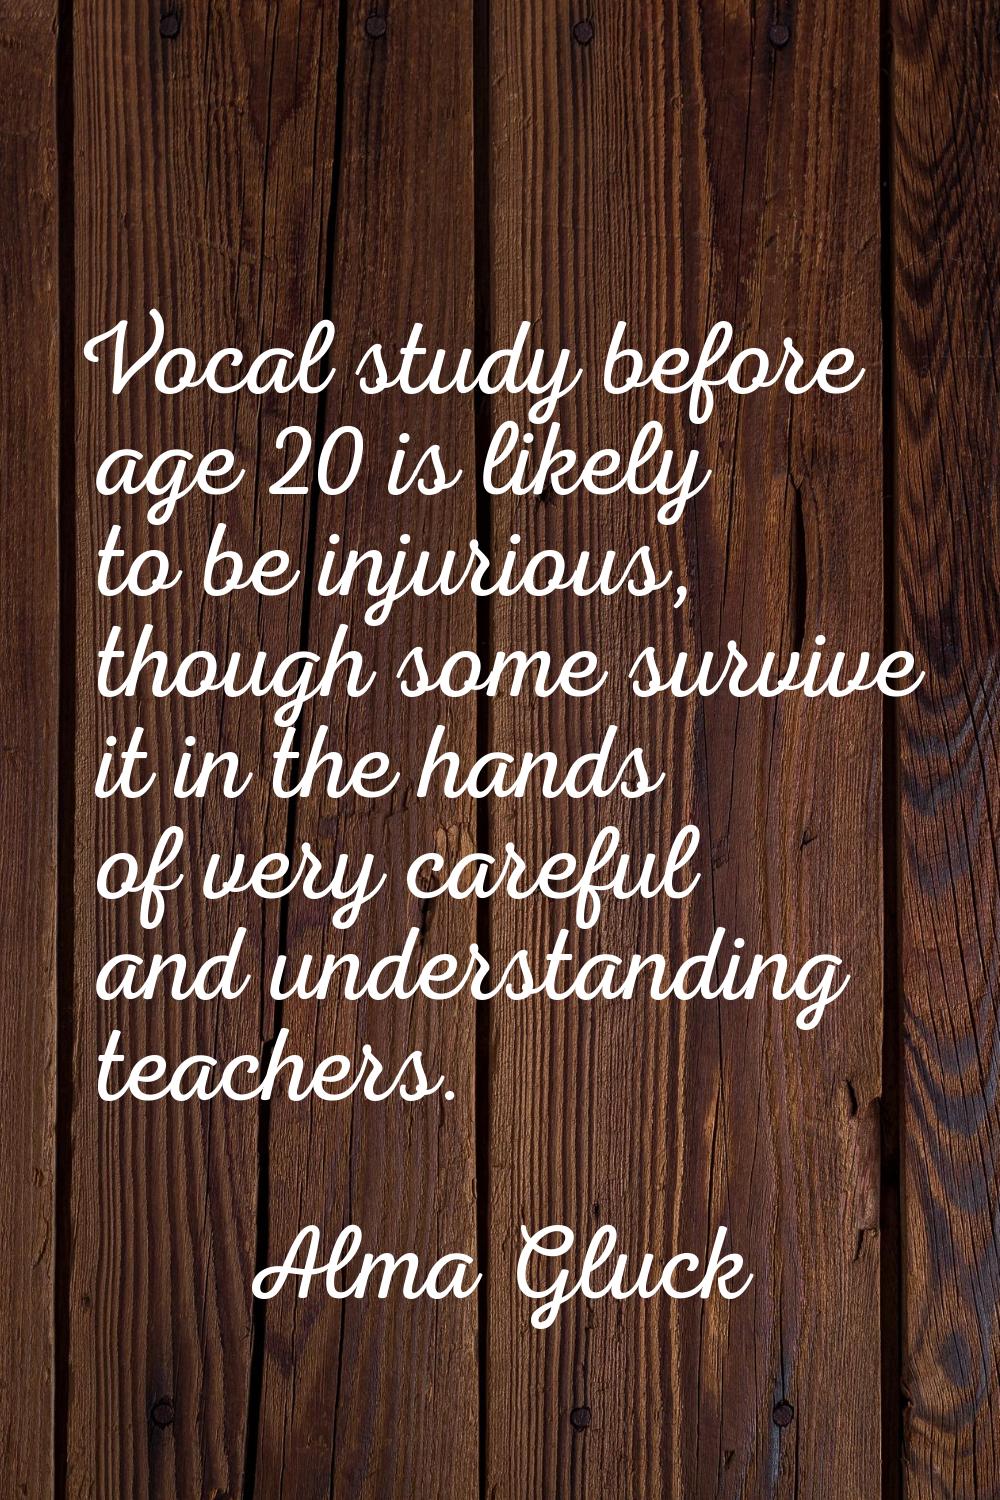 Vocal study before age 20 is likely to be injurious, though some survive it in the hands of very ca